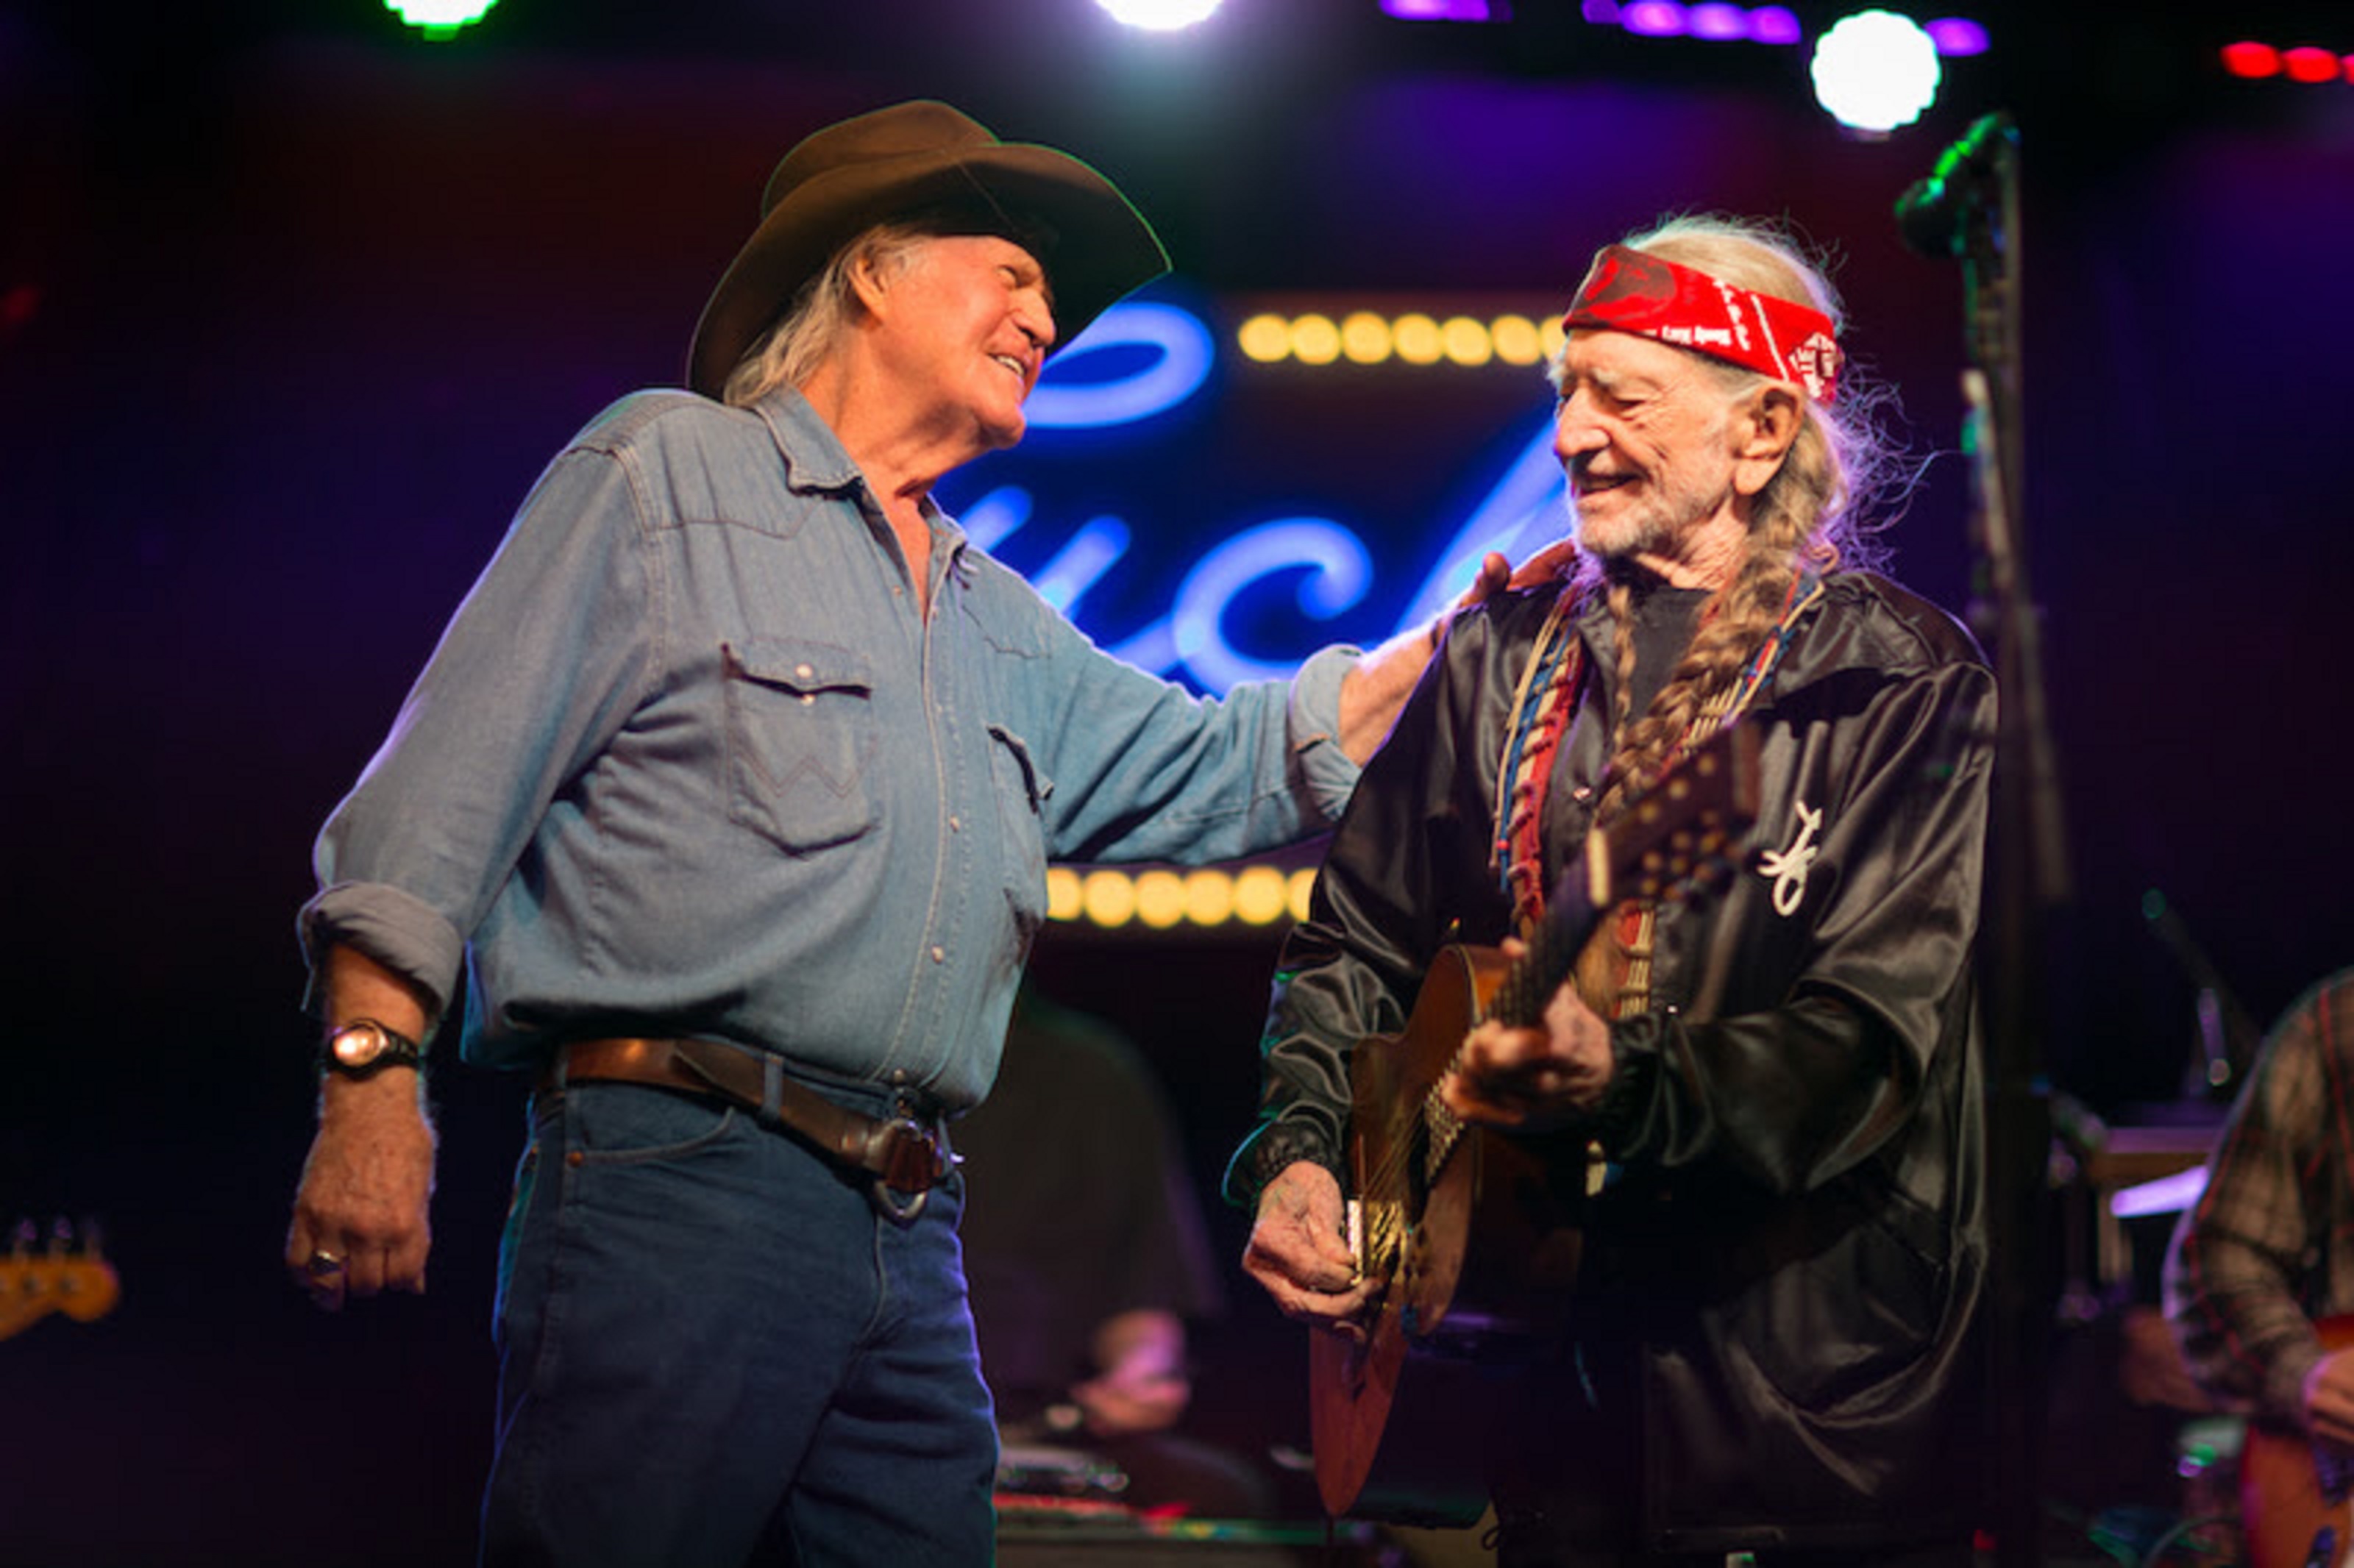 Live Forever: A Tribute To Billy Joe Shaver To Be Released November 11